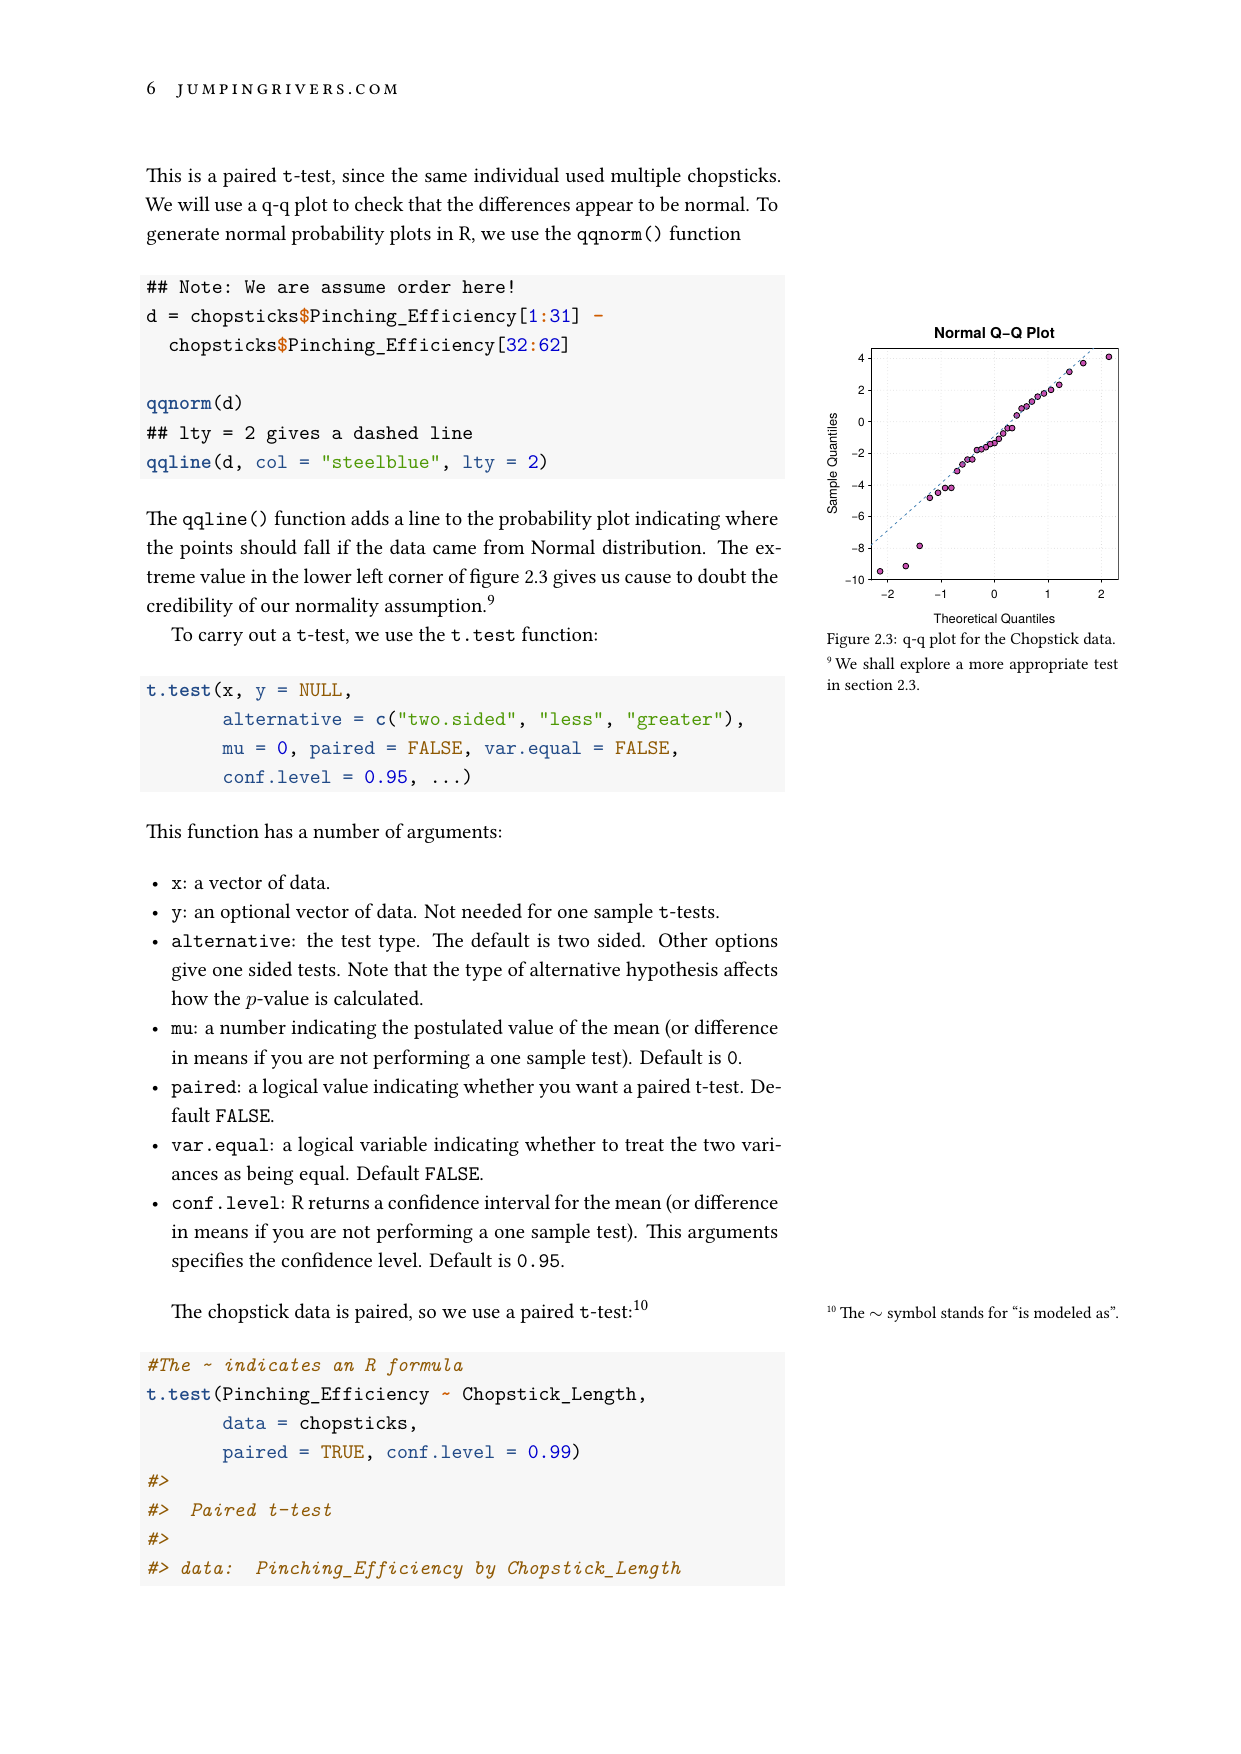 Example course material for 'Statistical Modelling with R